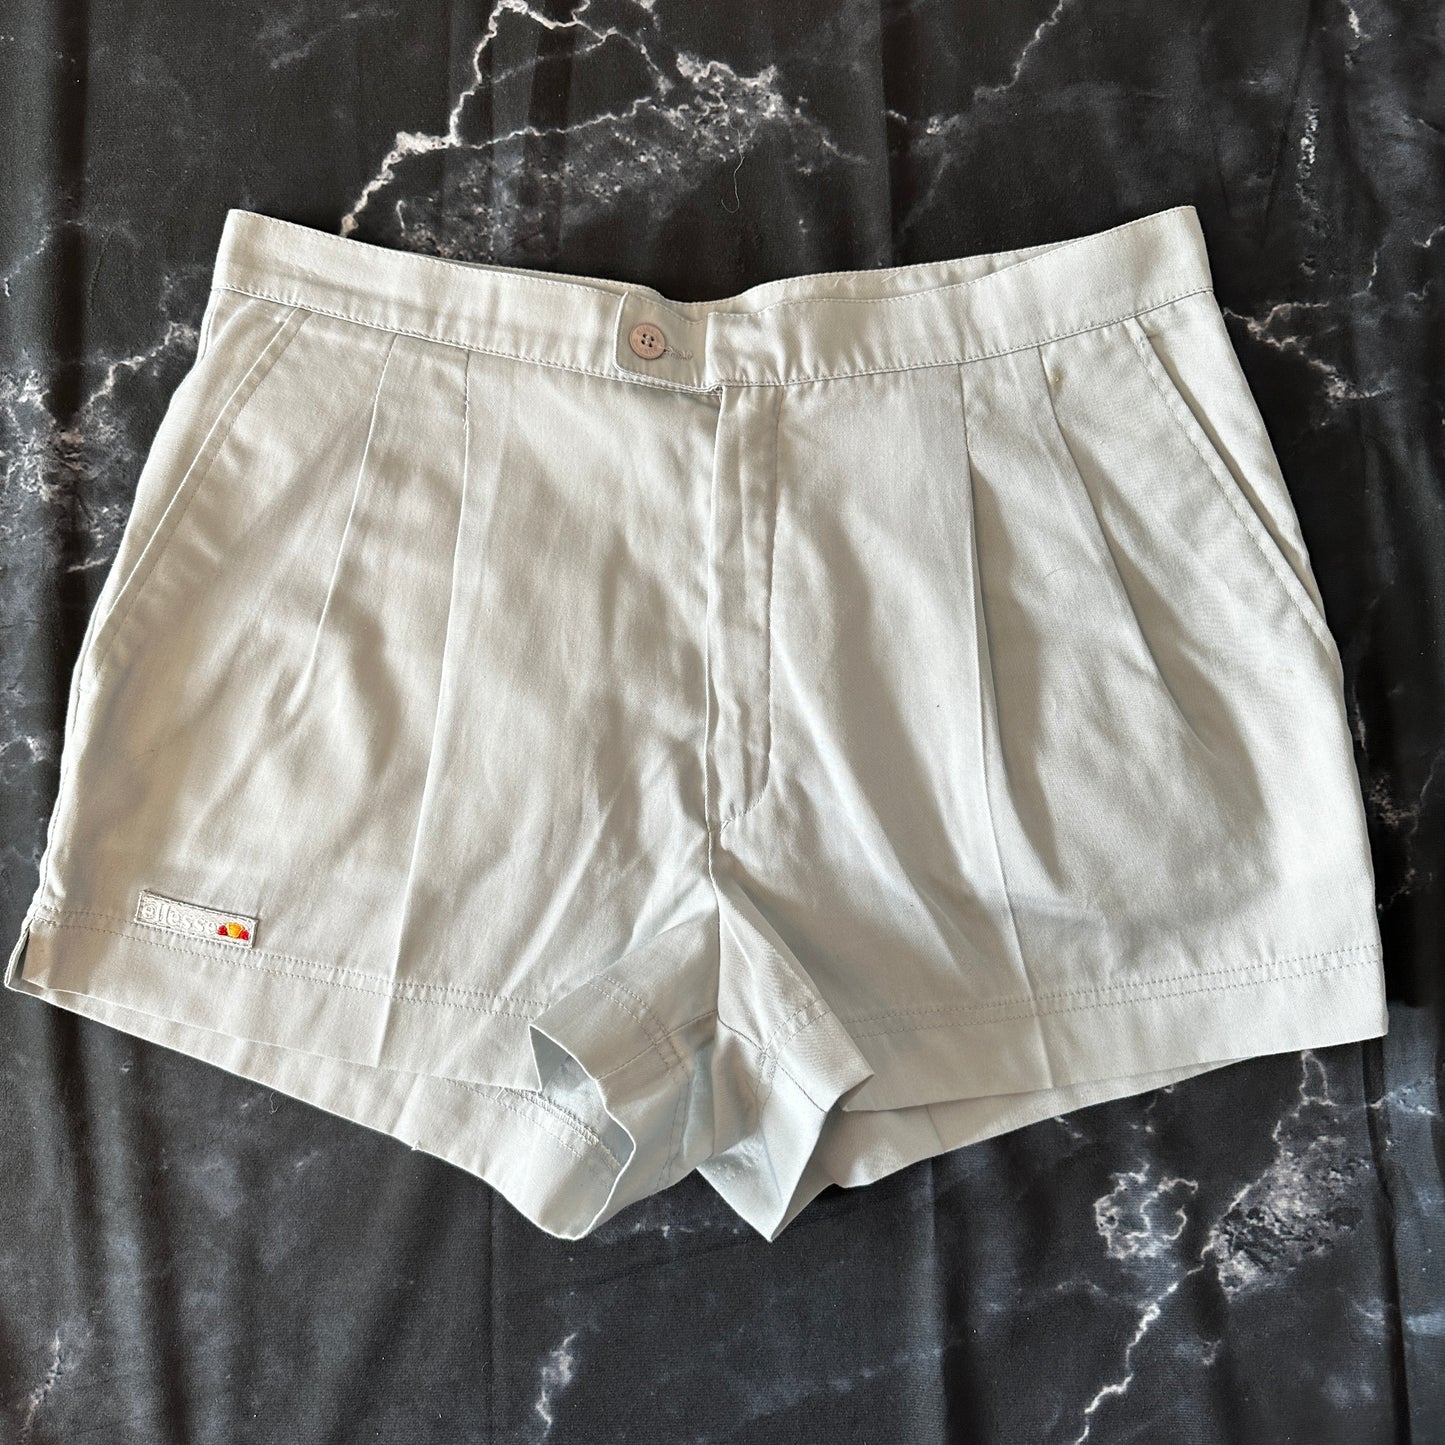 Ellesse 80s Tennis Shorts - M - Made in Italy